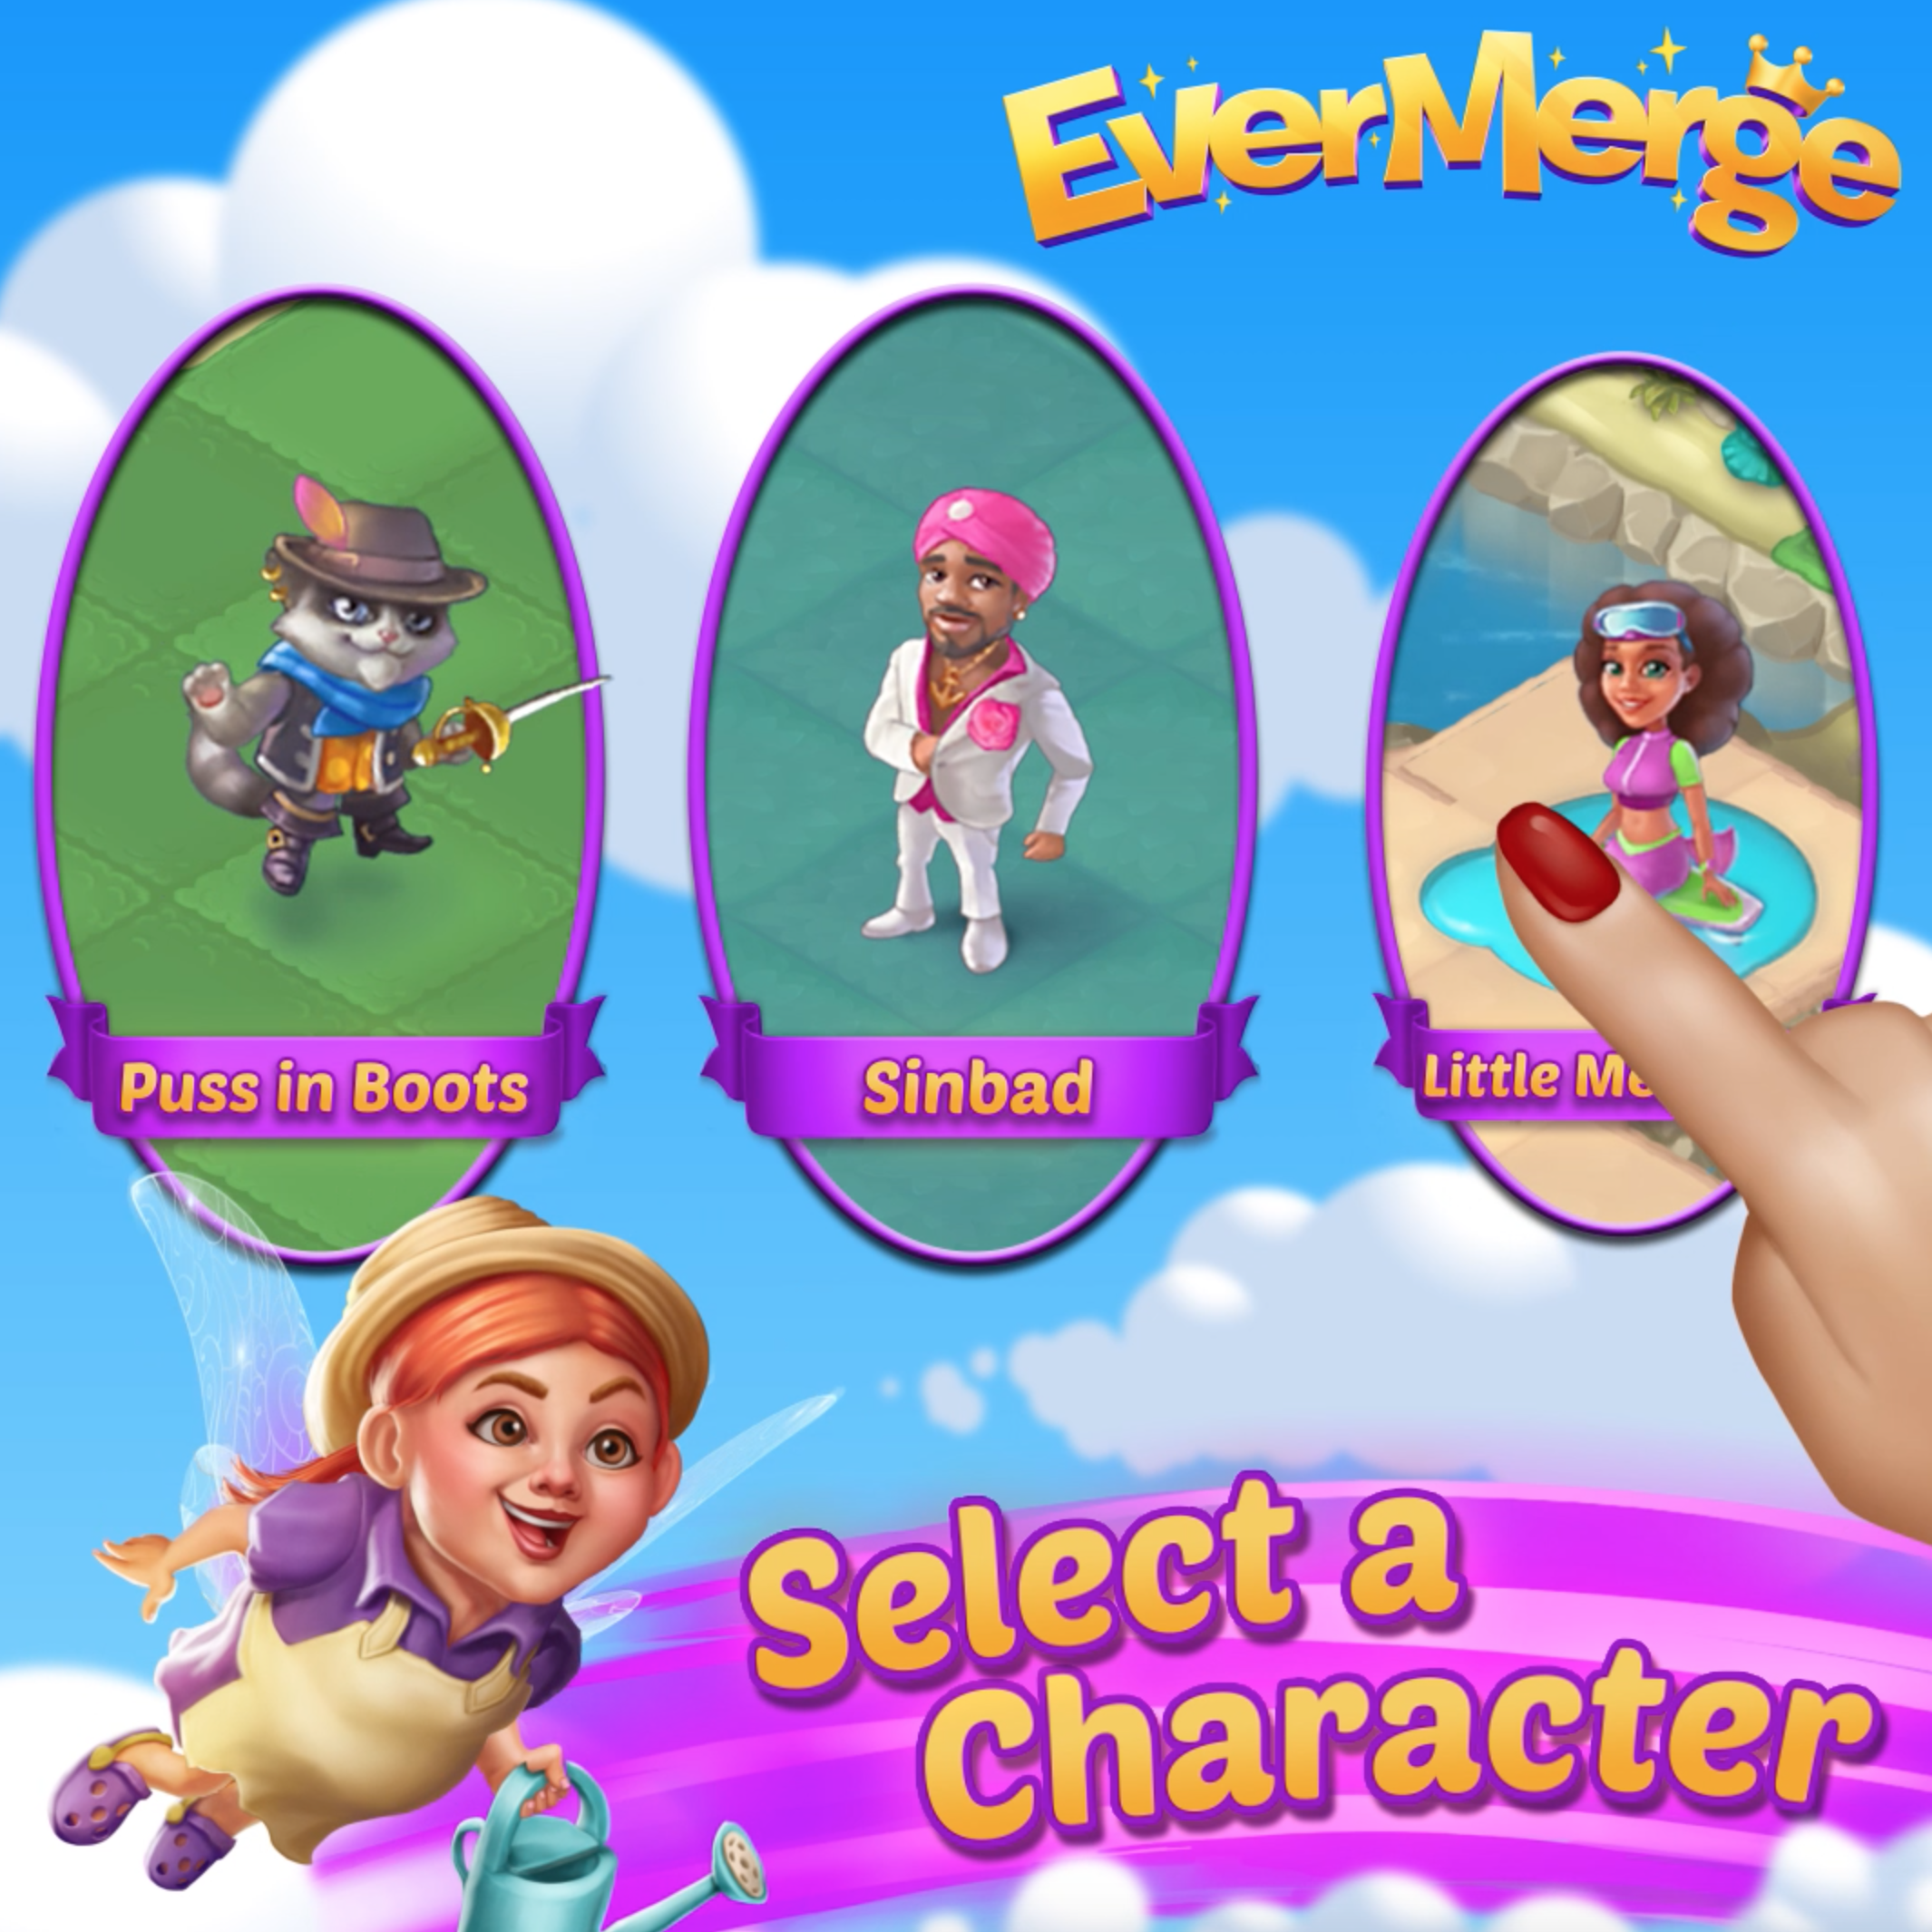 Evermerge Character Select